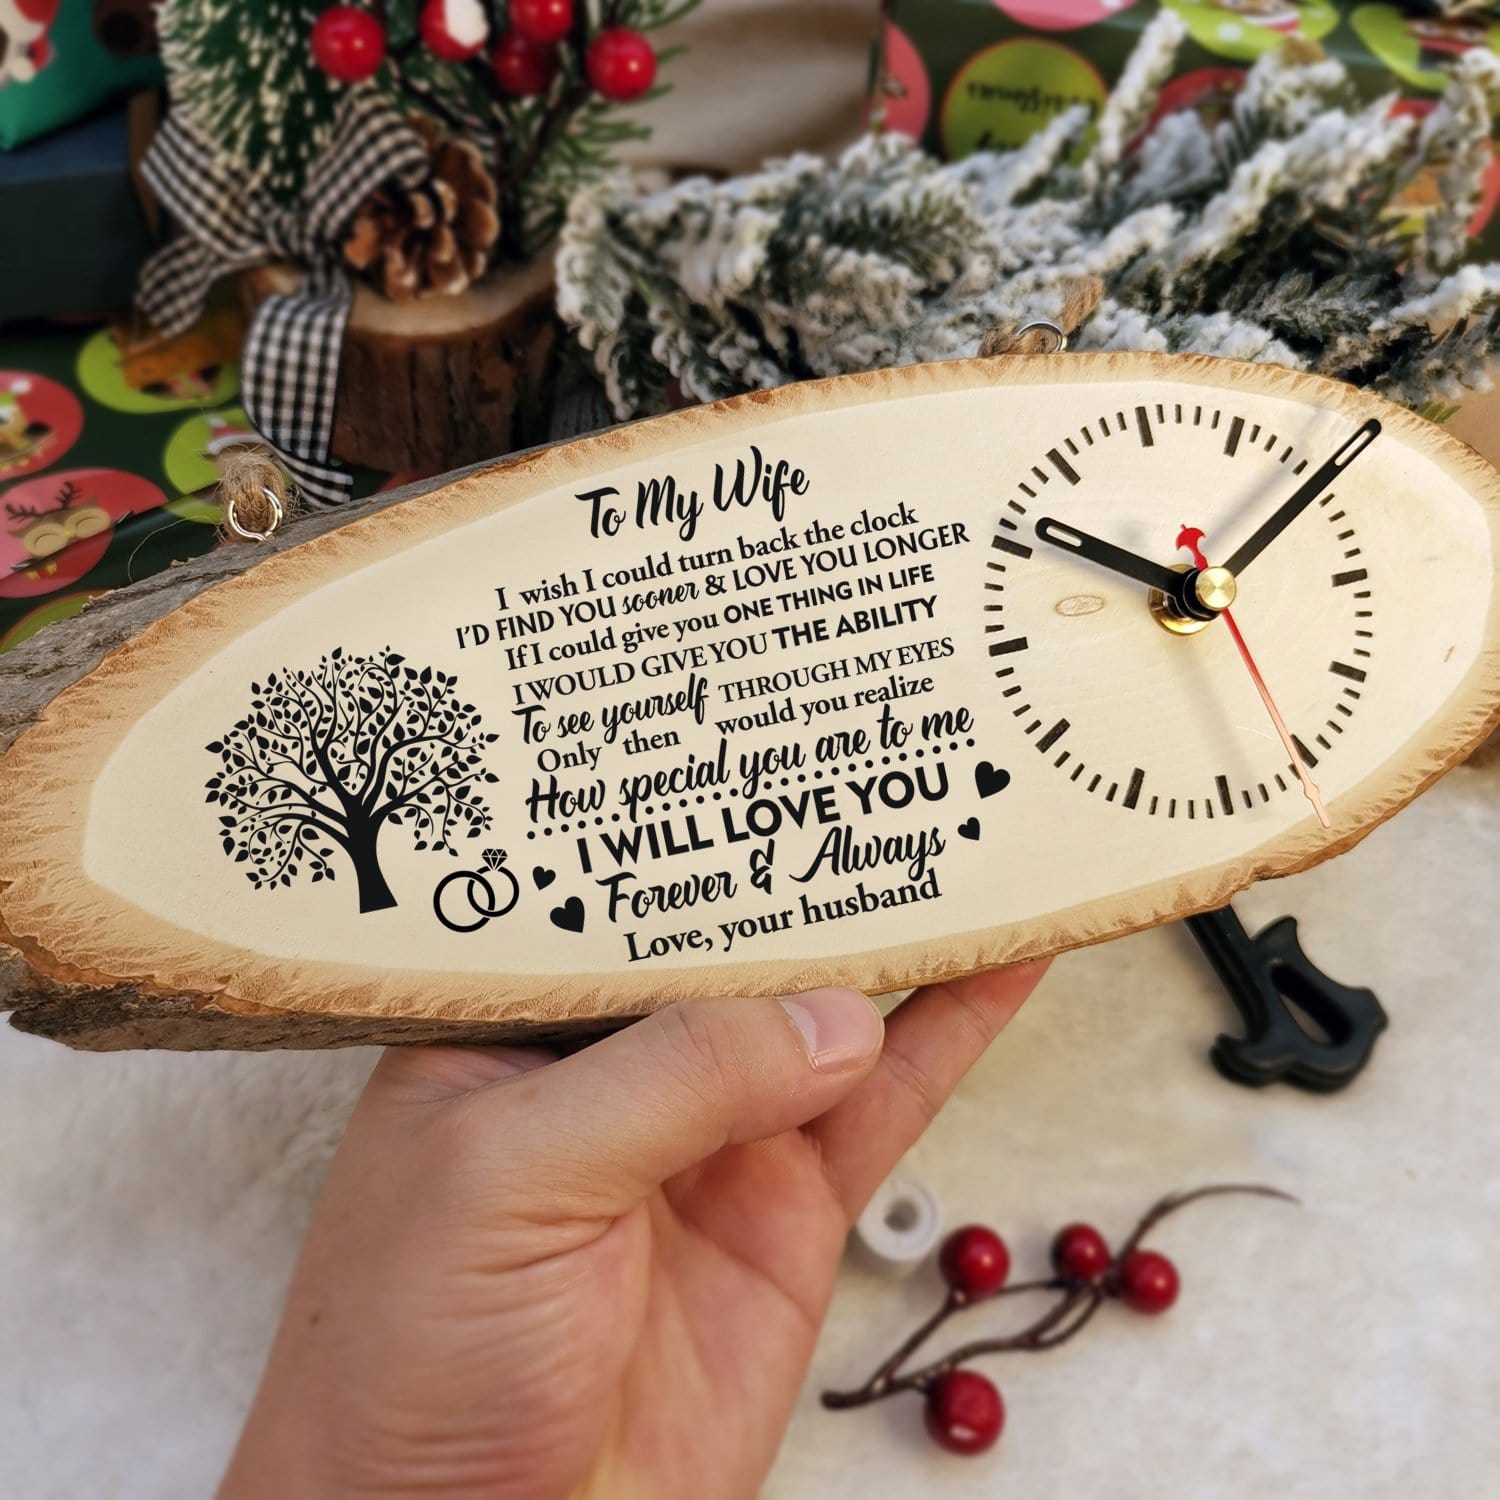 Table Clocks To My Wife - I Will Love You Forever And Always Engraved Wood Clock GiveMe-Gifts